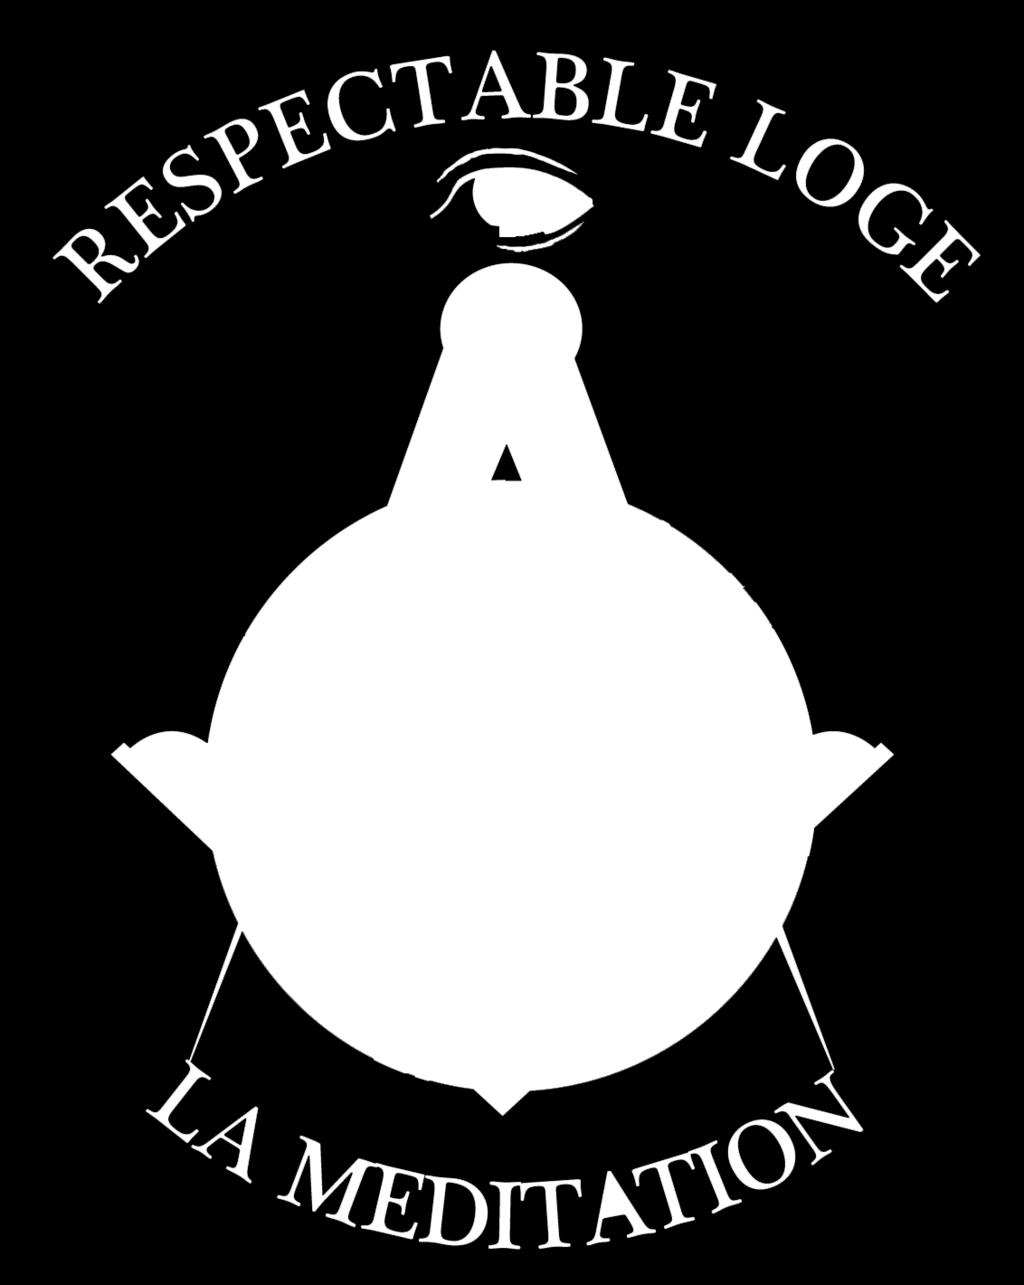 La Respectable Loge La Meditation Masonic Tutorial The Entered Apprentice Generally Before Acceptance Why does a Candidate go through an Initiation Ceremony prior to his or her joining La Meditation